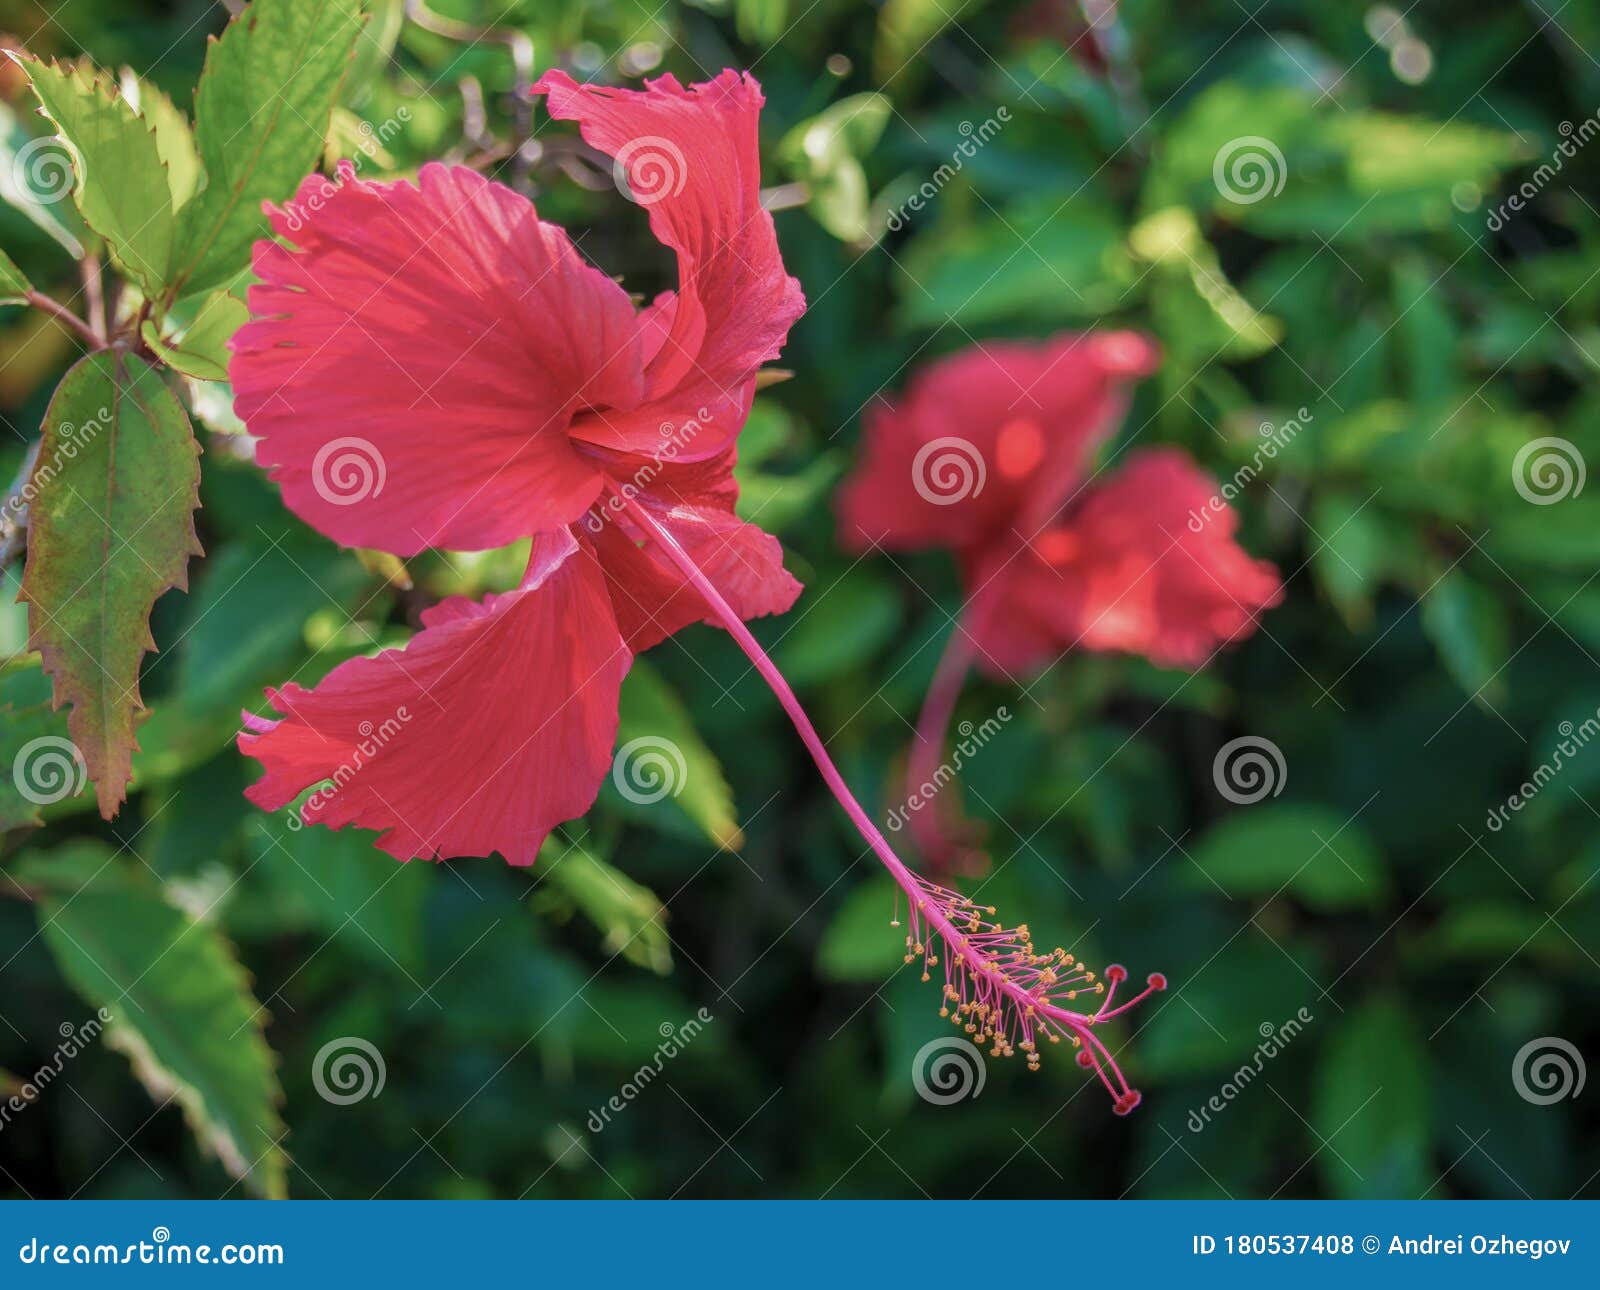 pollen of hibiscus rosa-sinensis or chaba flower is mix with red and yellow color. a flower is red, showy and big. hibiscus can